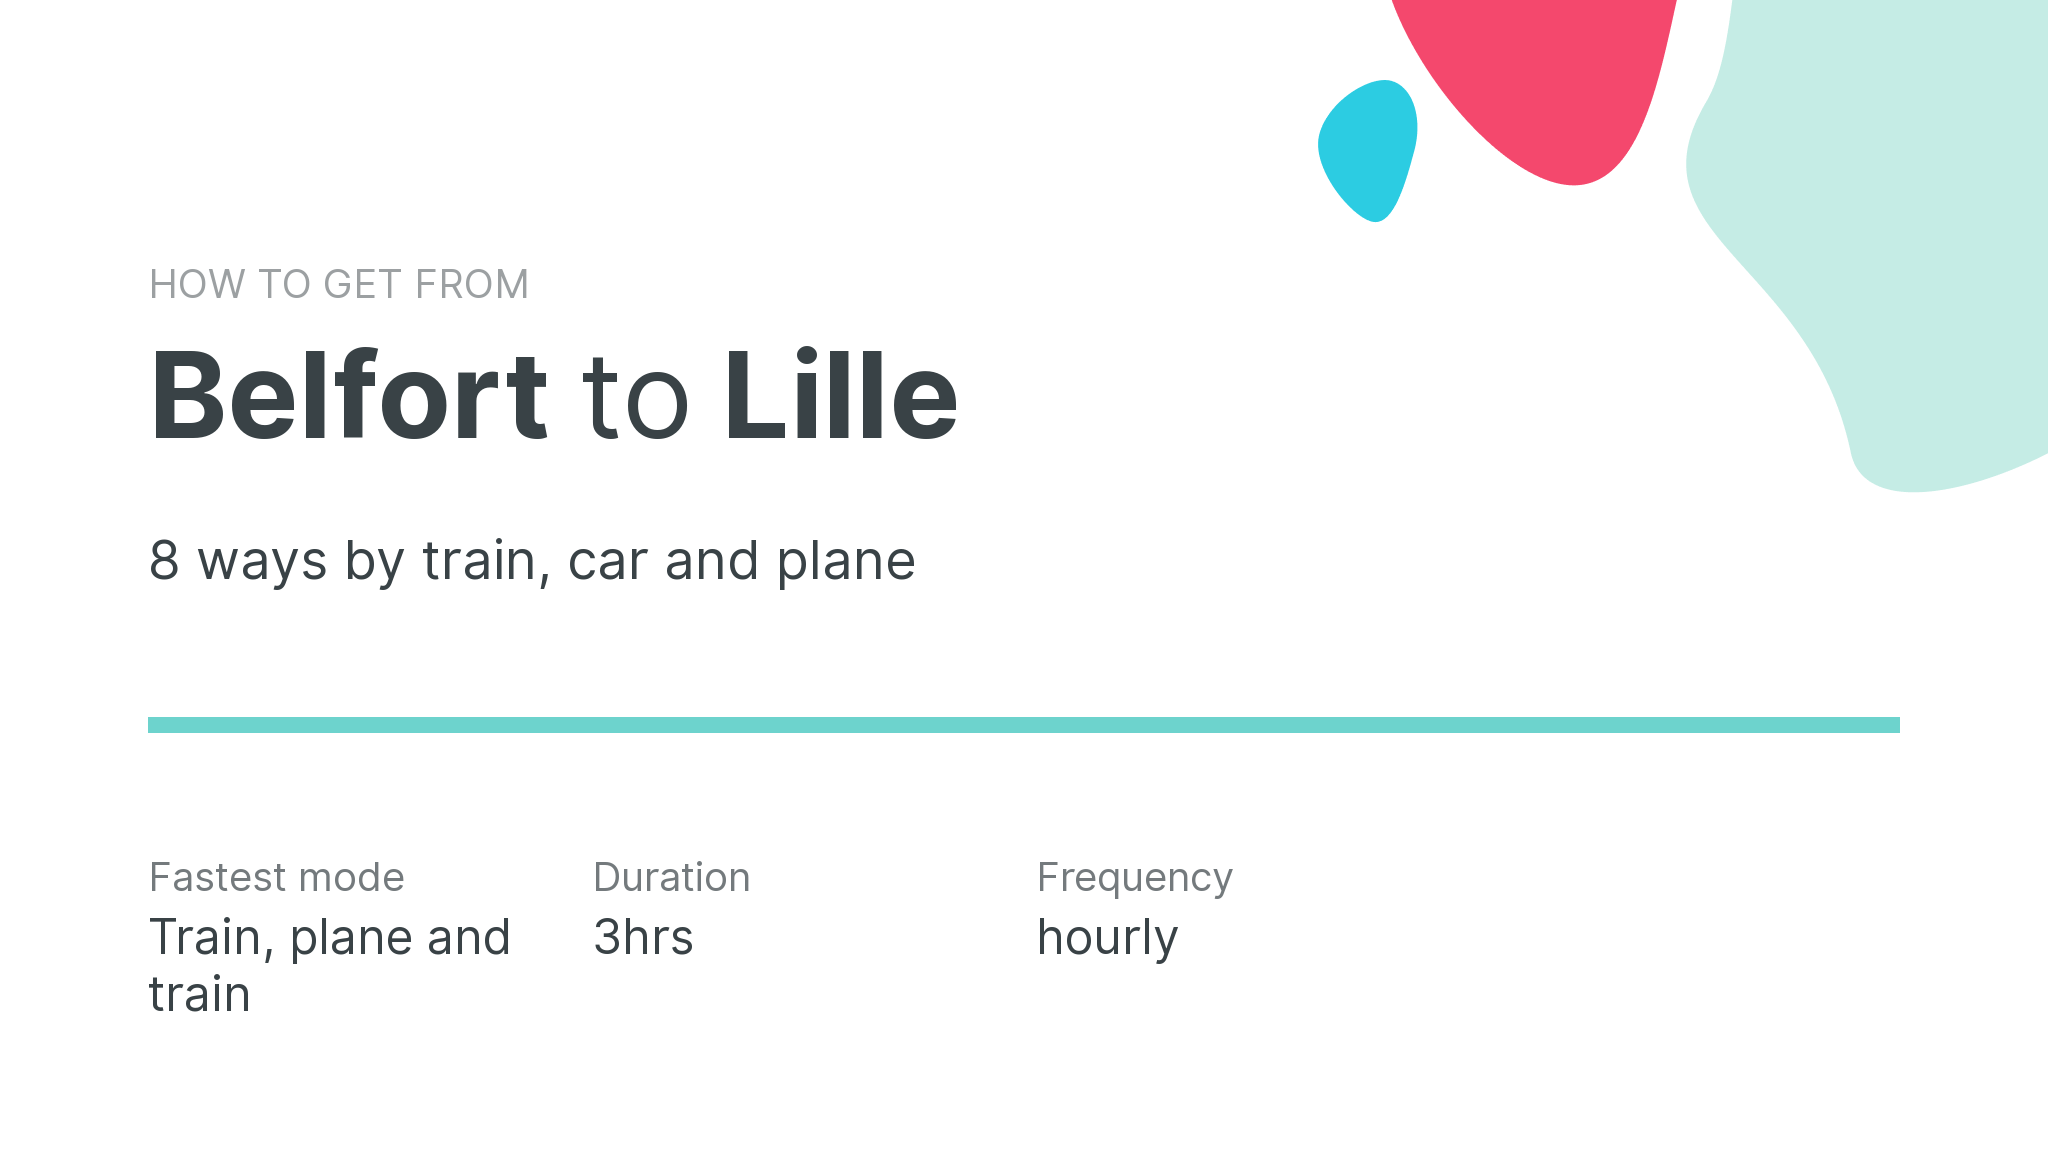 How do I get from Belfort to Lille